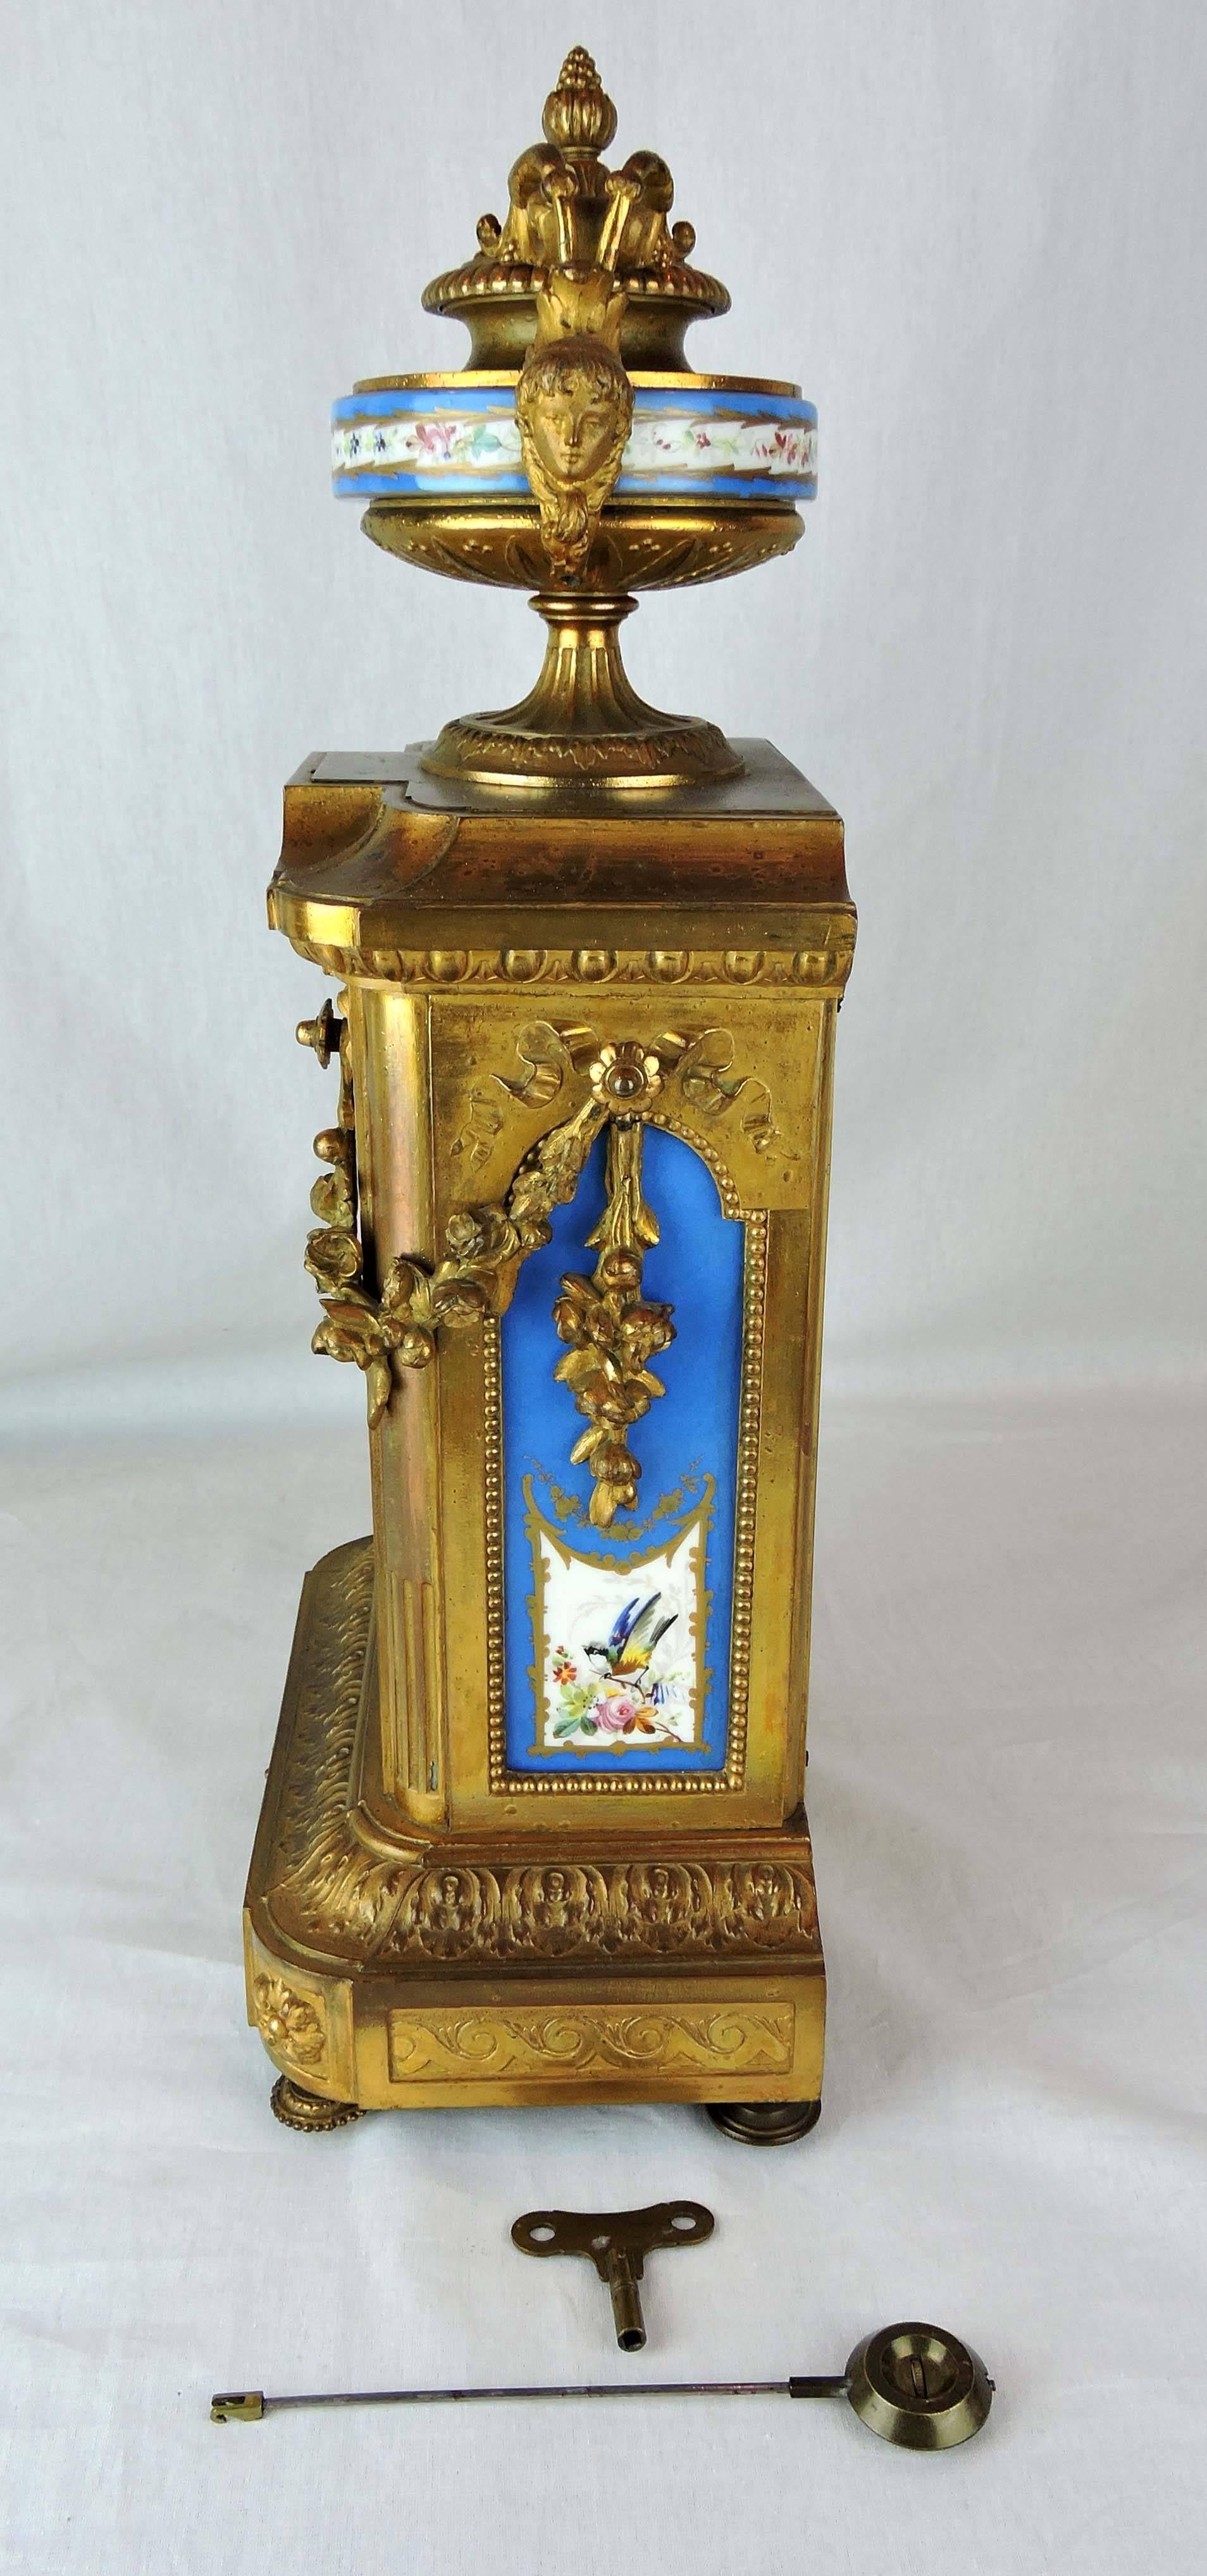 We offer a French 19th century, elongated, rectangular, gilt ormolu mantle clock with decorative porcelain panels.

The time piece is surmounted by a squat, cylindrical, lidded, neoclassical urn with figural handles trailing floral garlands and,